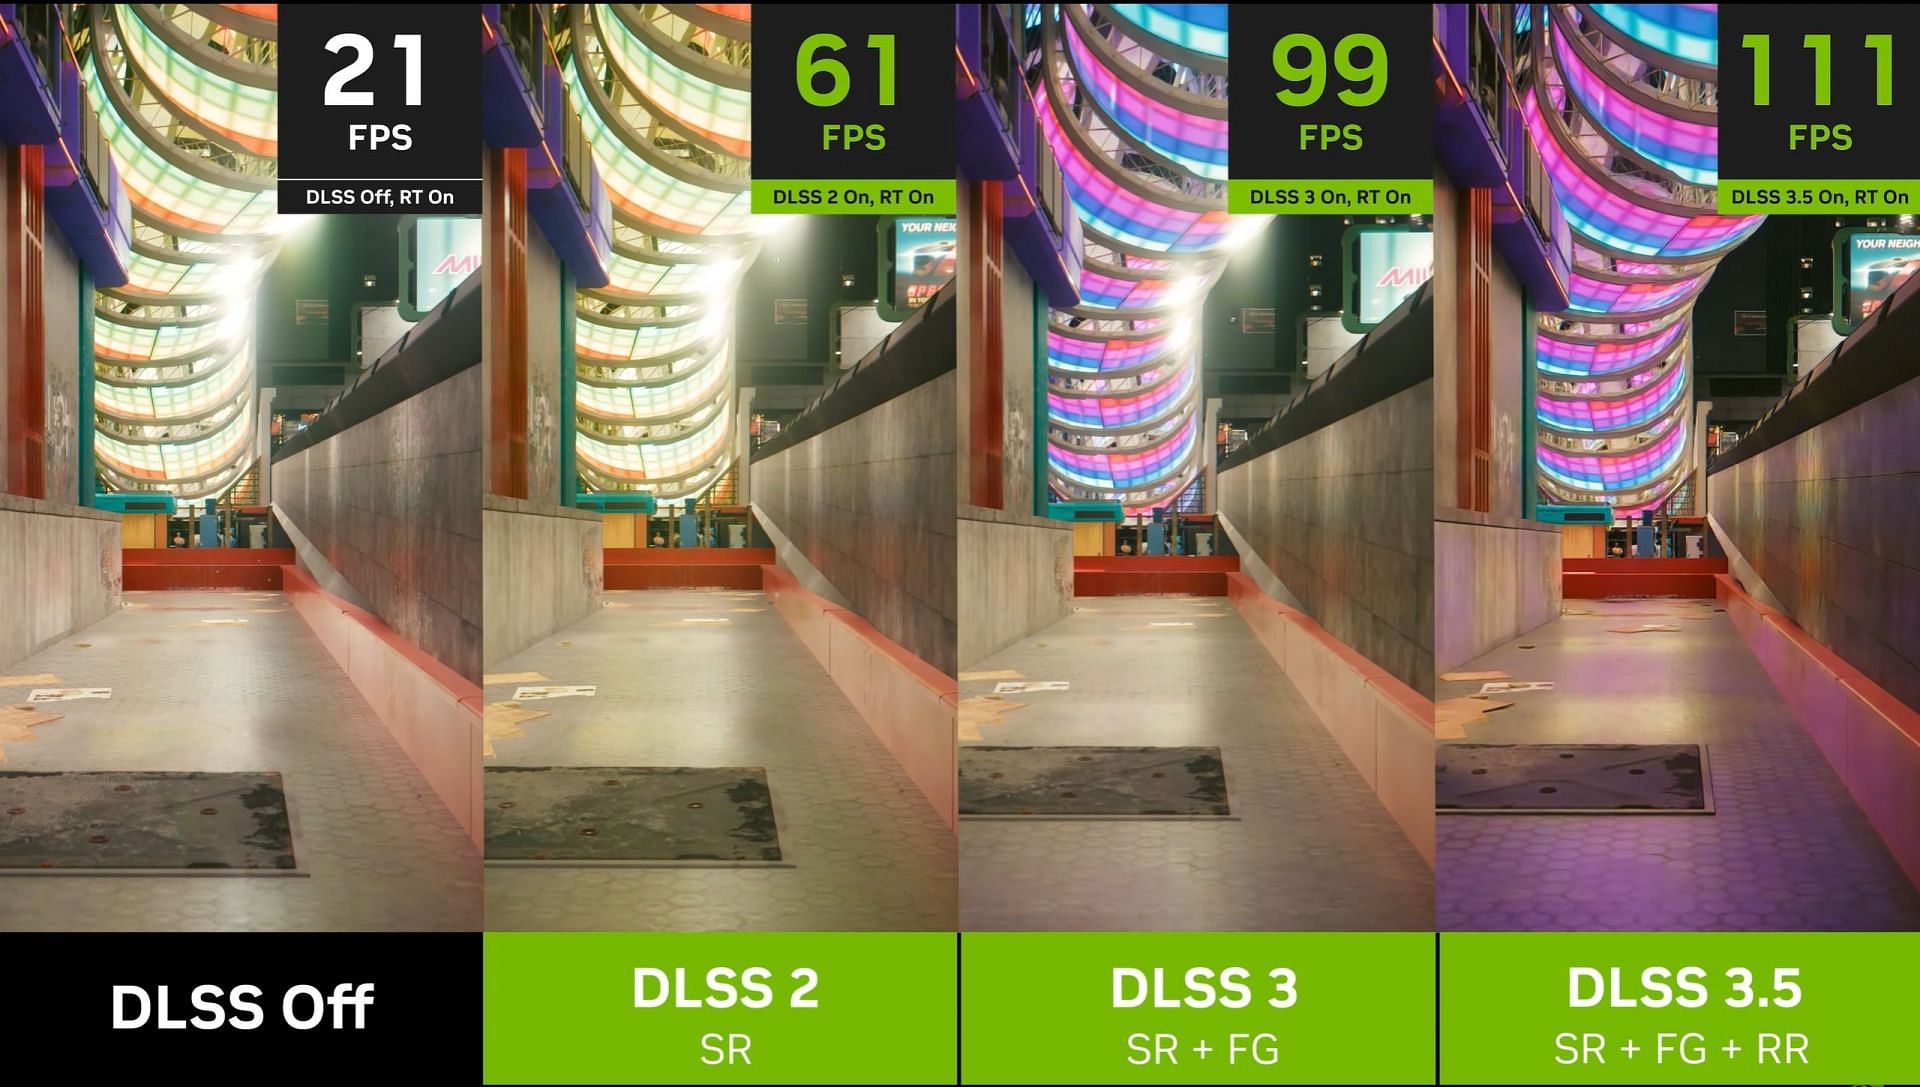 Performance gains with DLSS (Image via Nvidia Geforce)